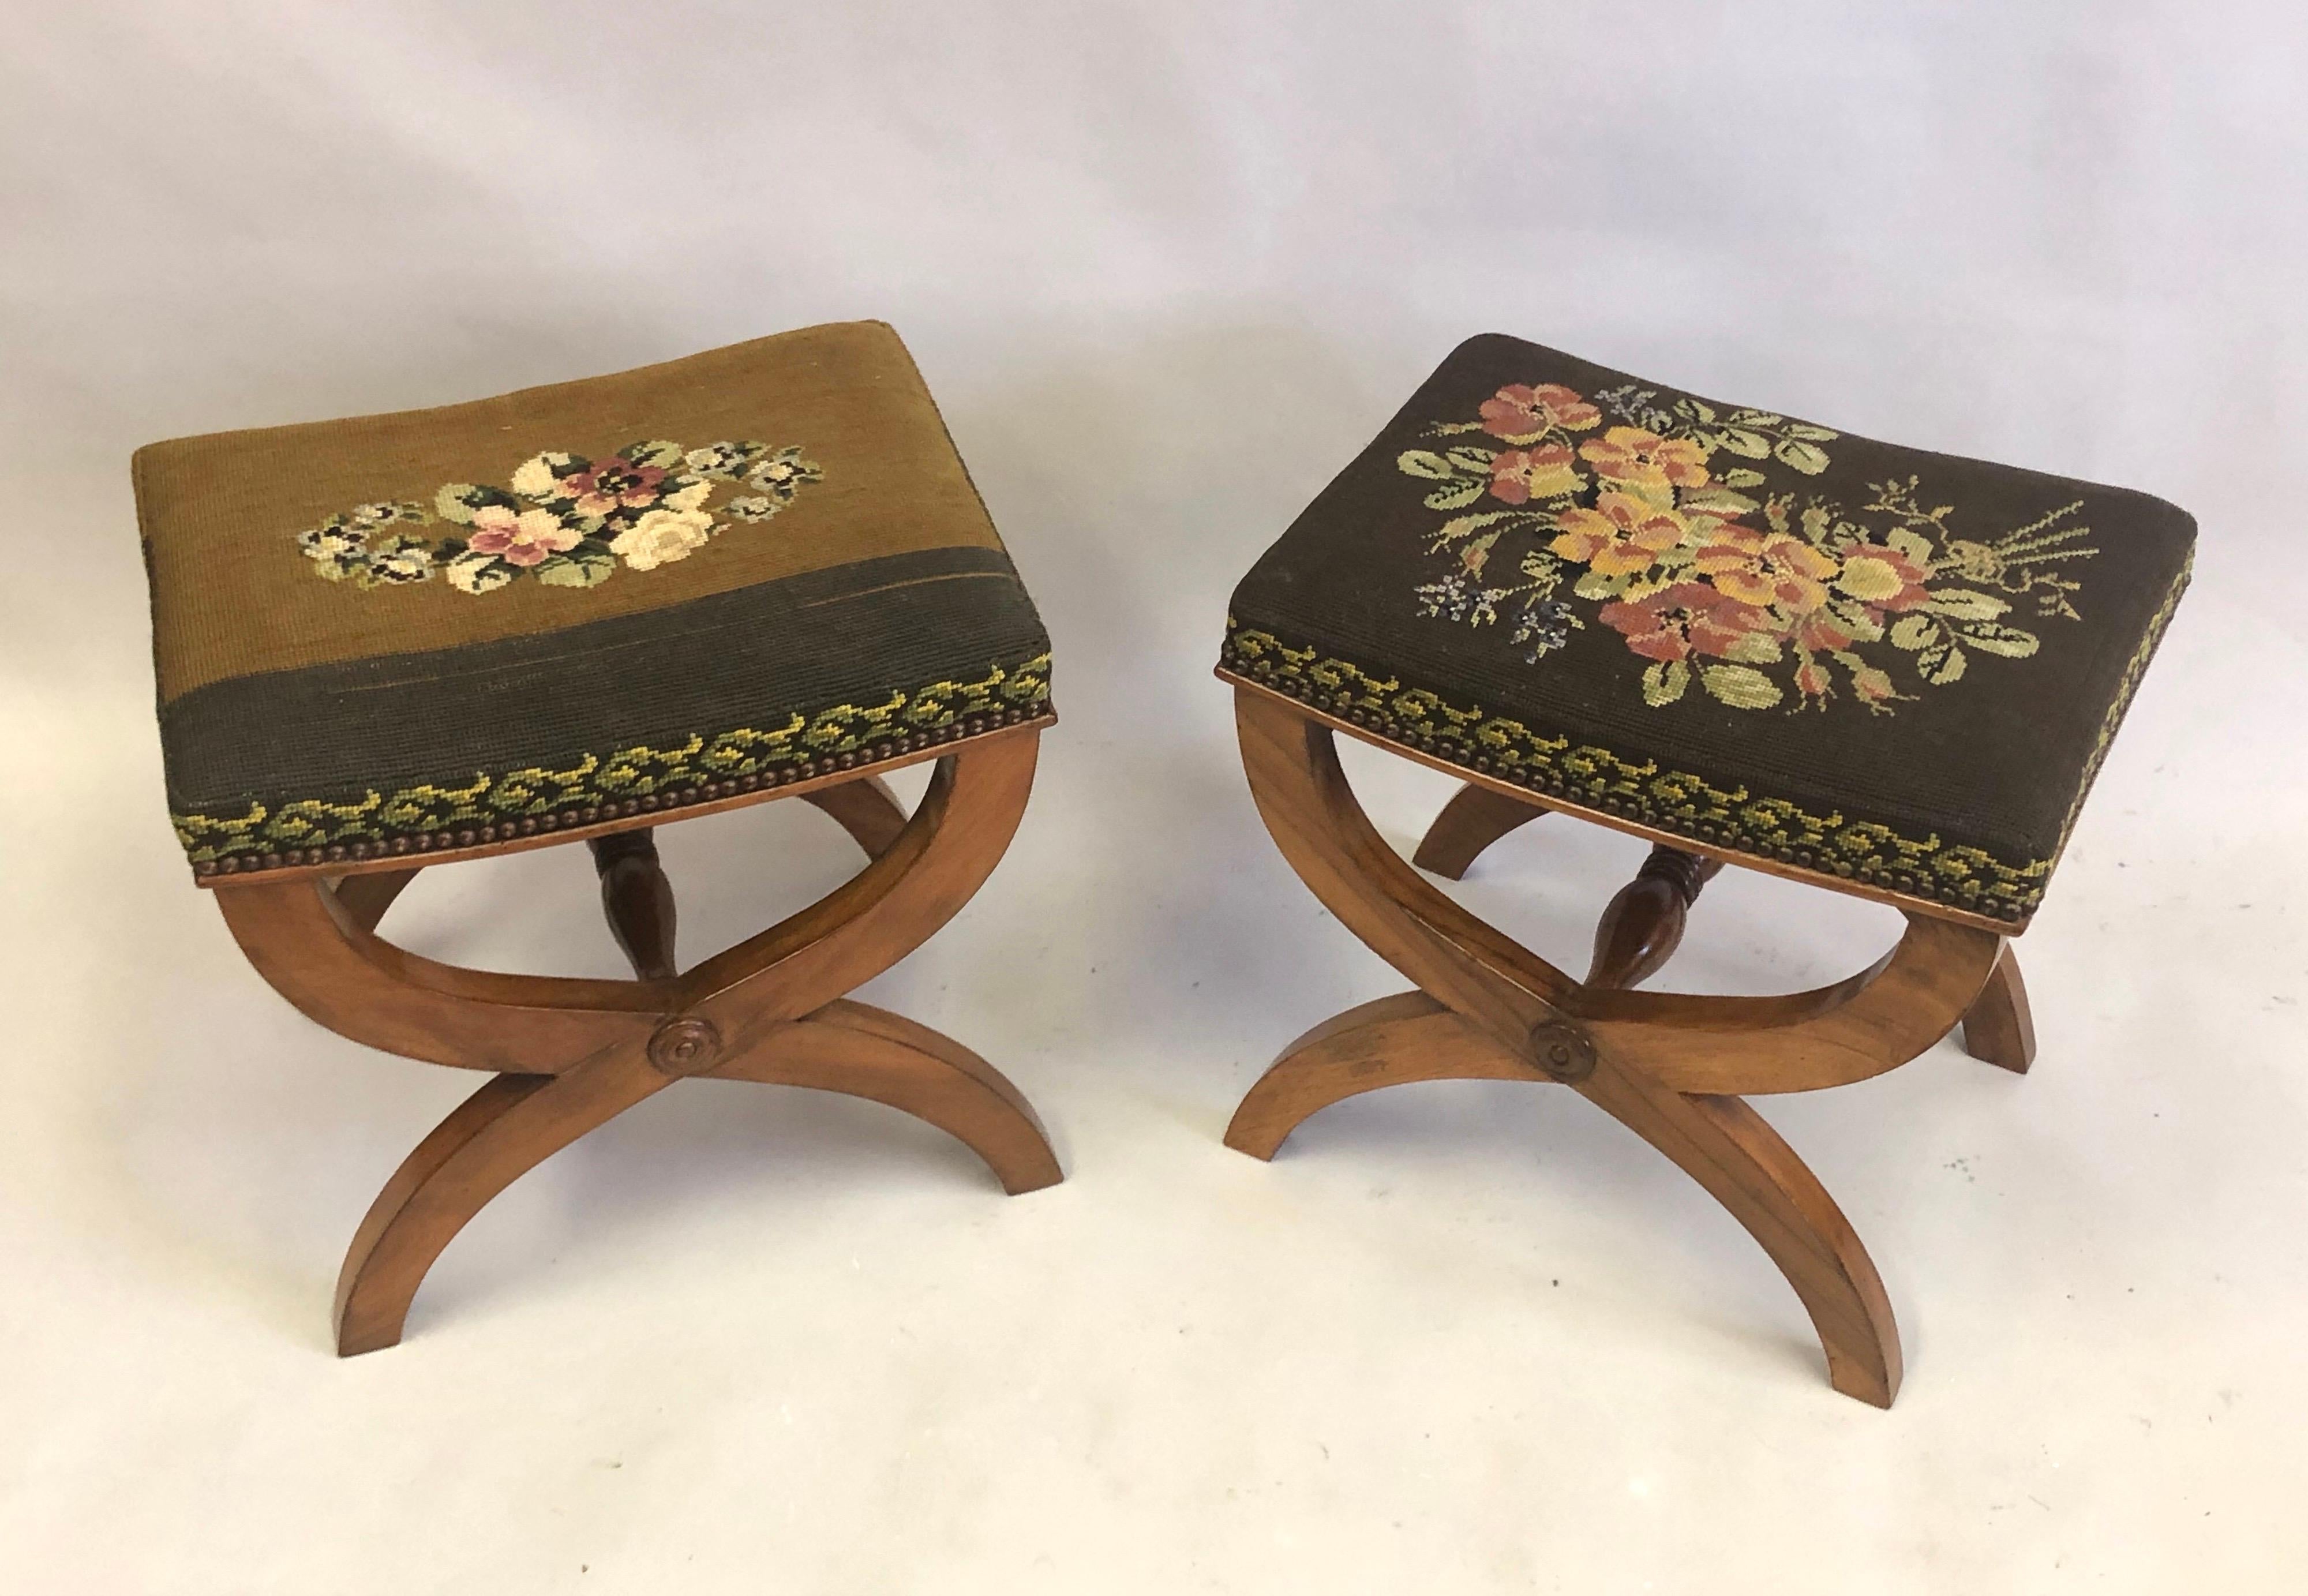 Pair of French Modern Neoclassical Stools / Benches Attributed to Andre Arbus In Good Condition For Sale In New York, NY